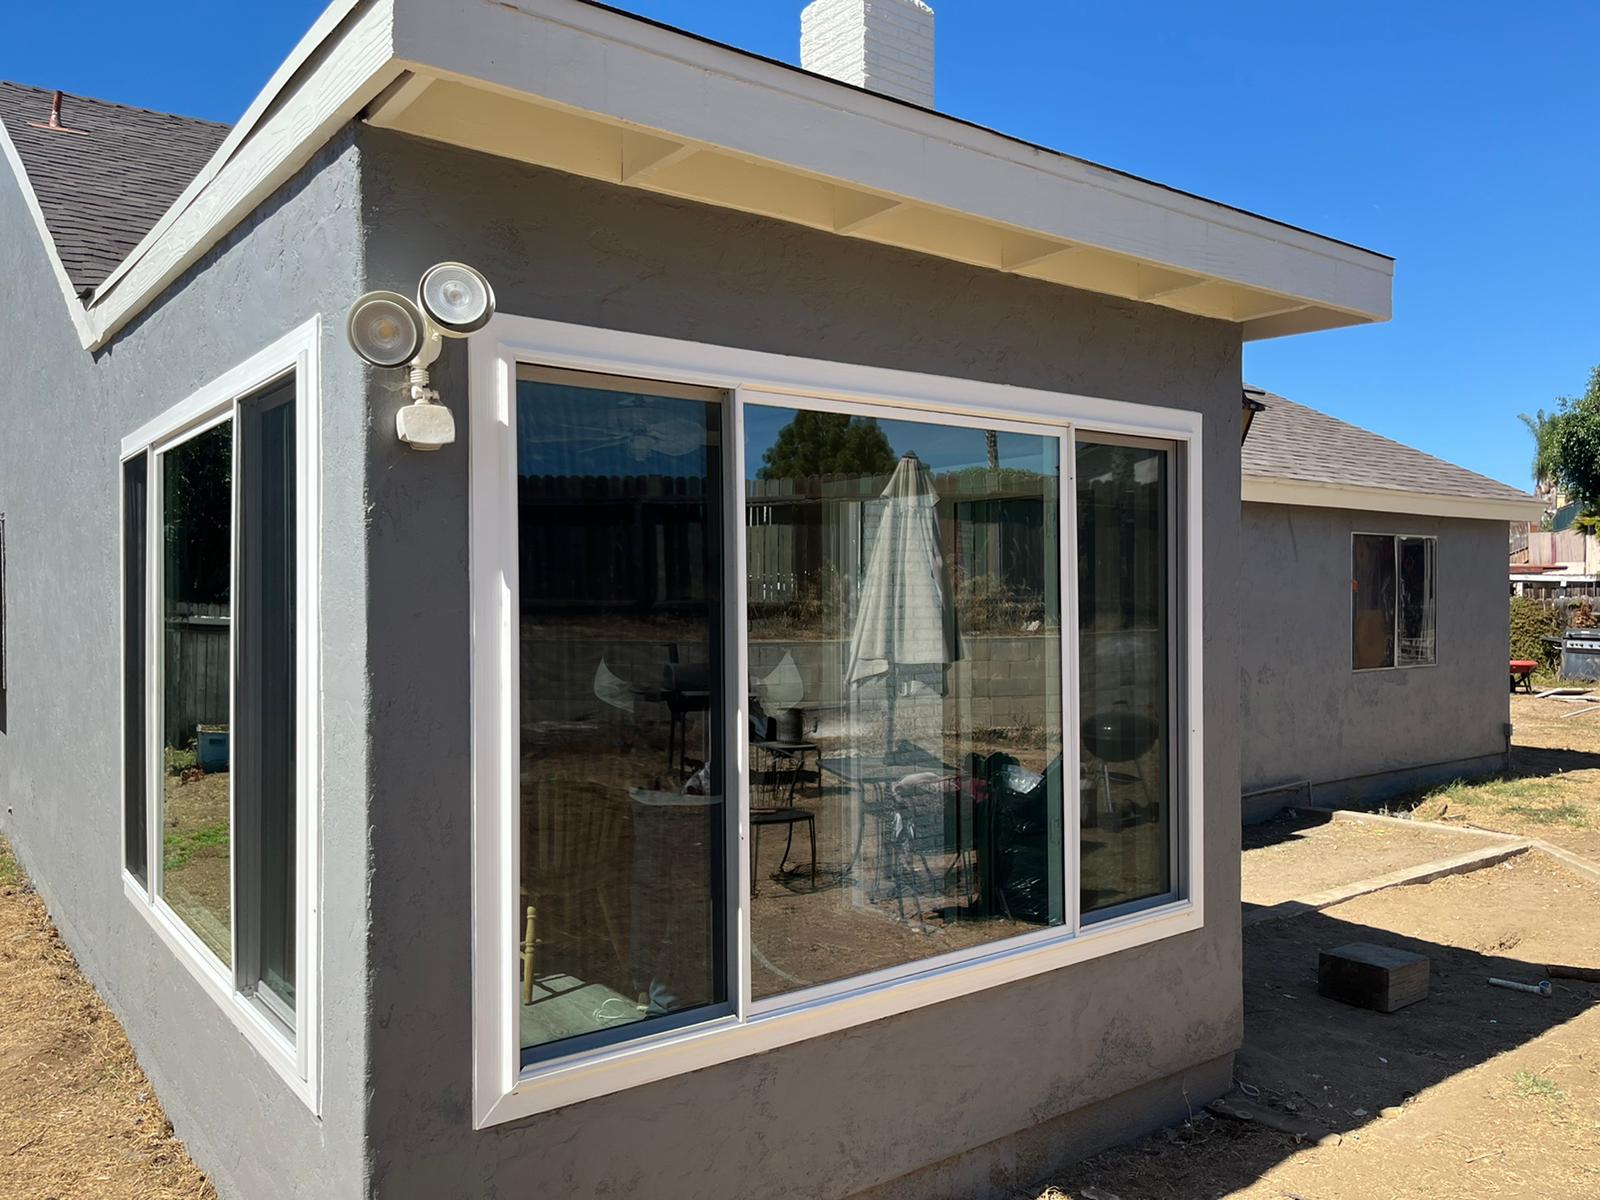 window replacement in san diego 92173